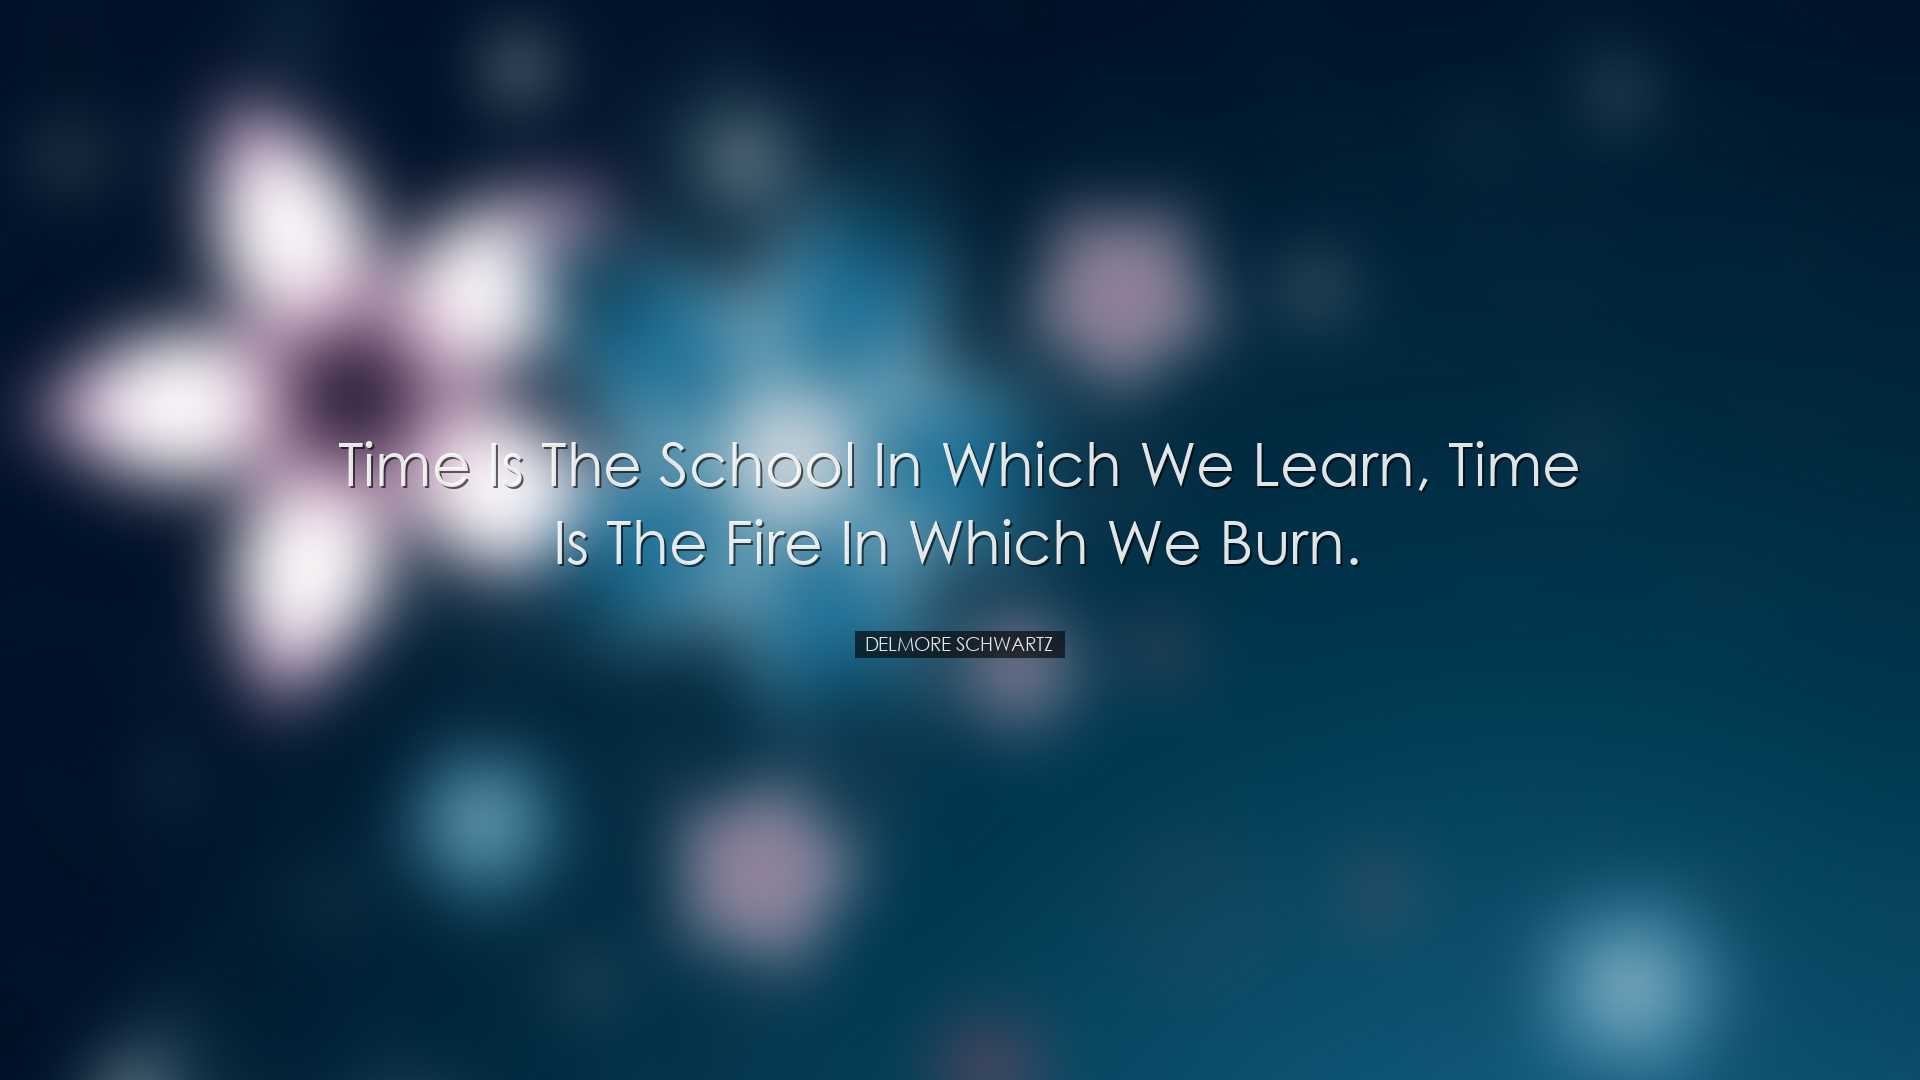 Time is the school in which we learn, time is the fire in which we